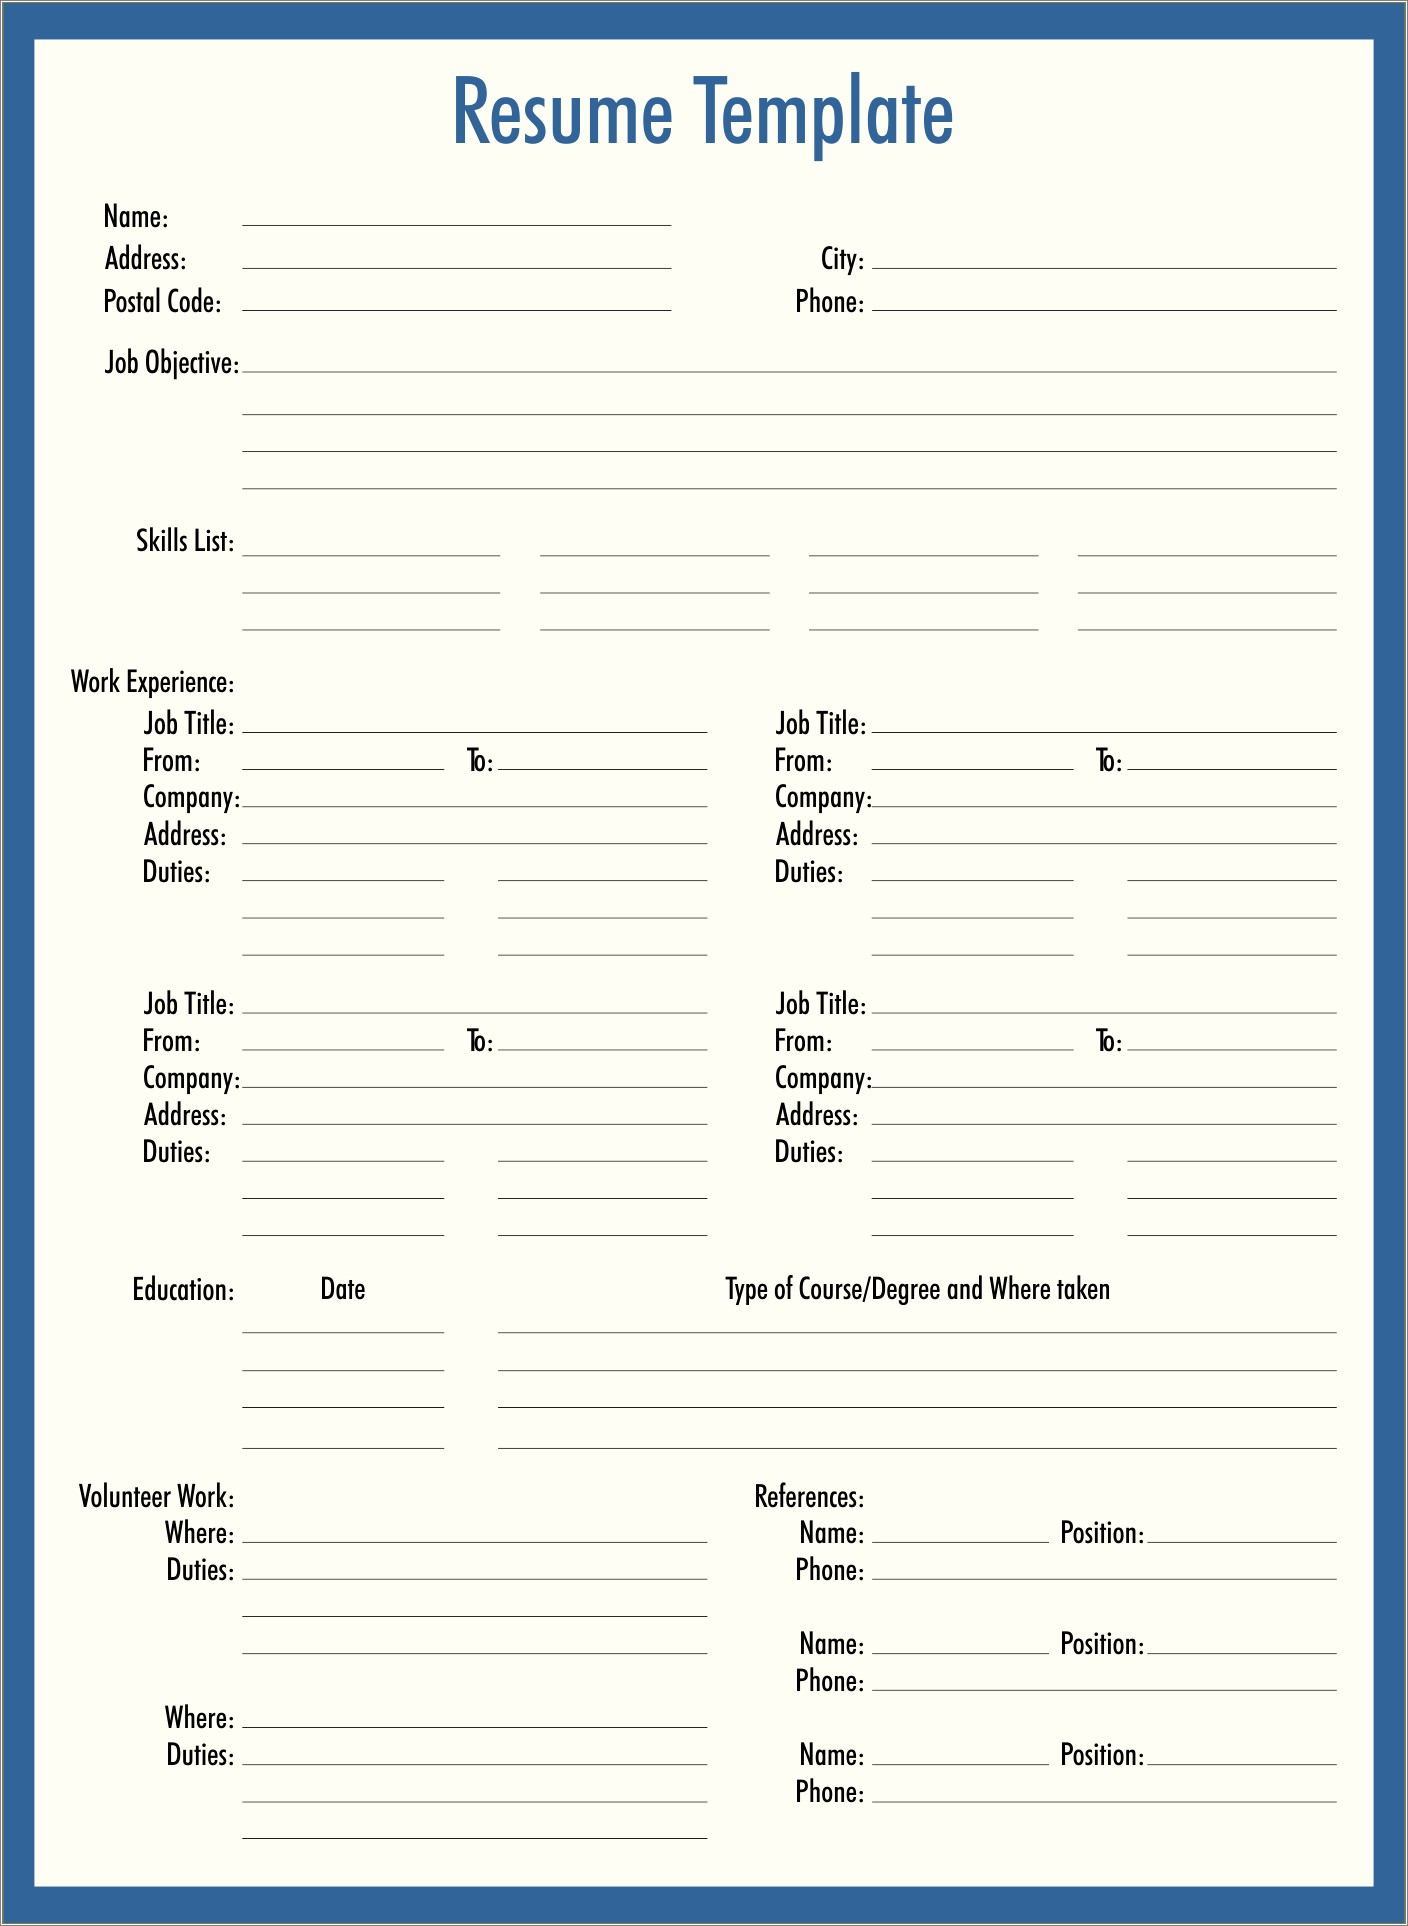 Fill Out And Print Resume For Free